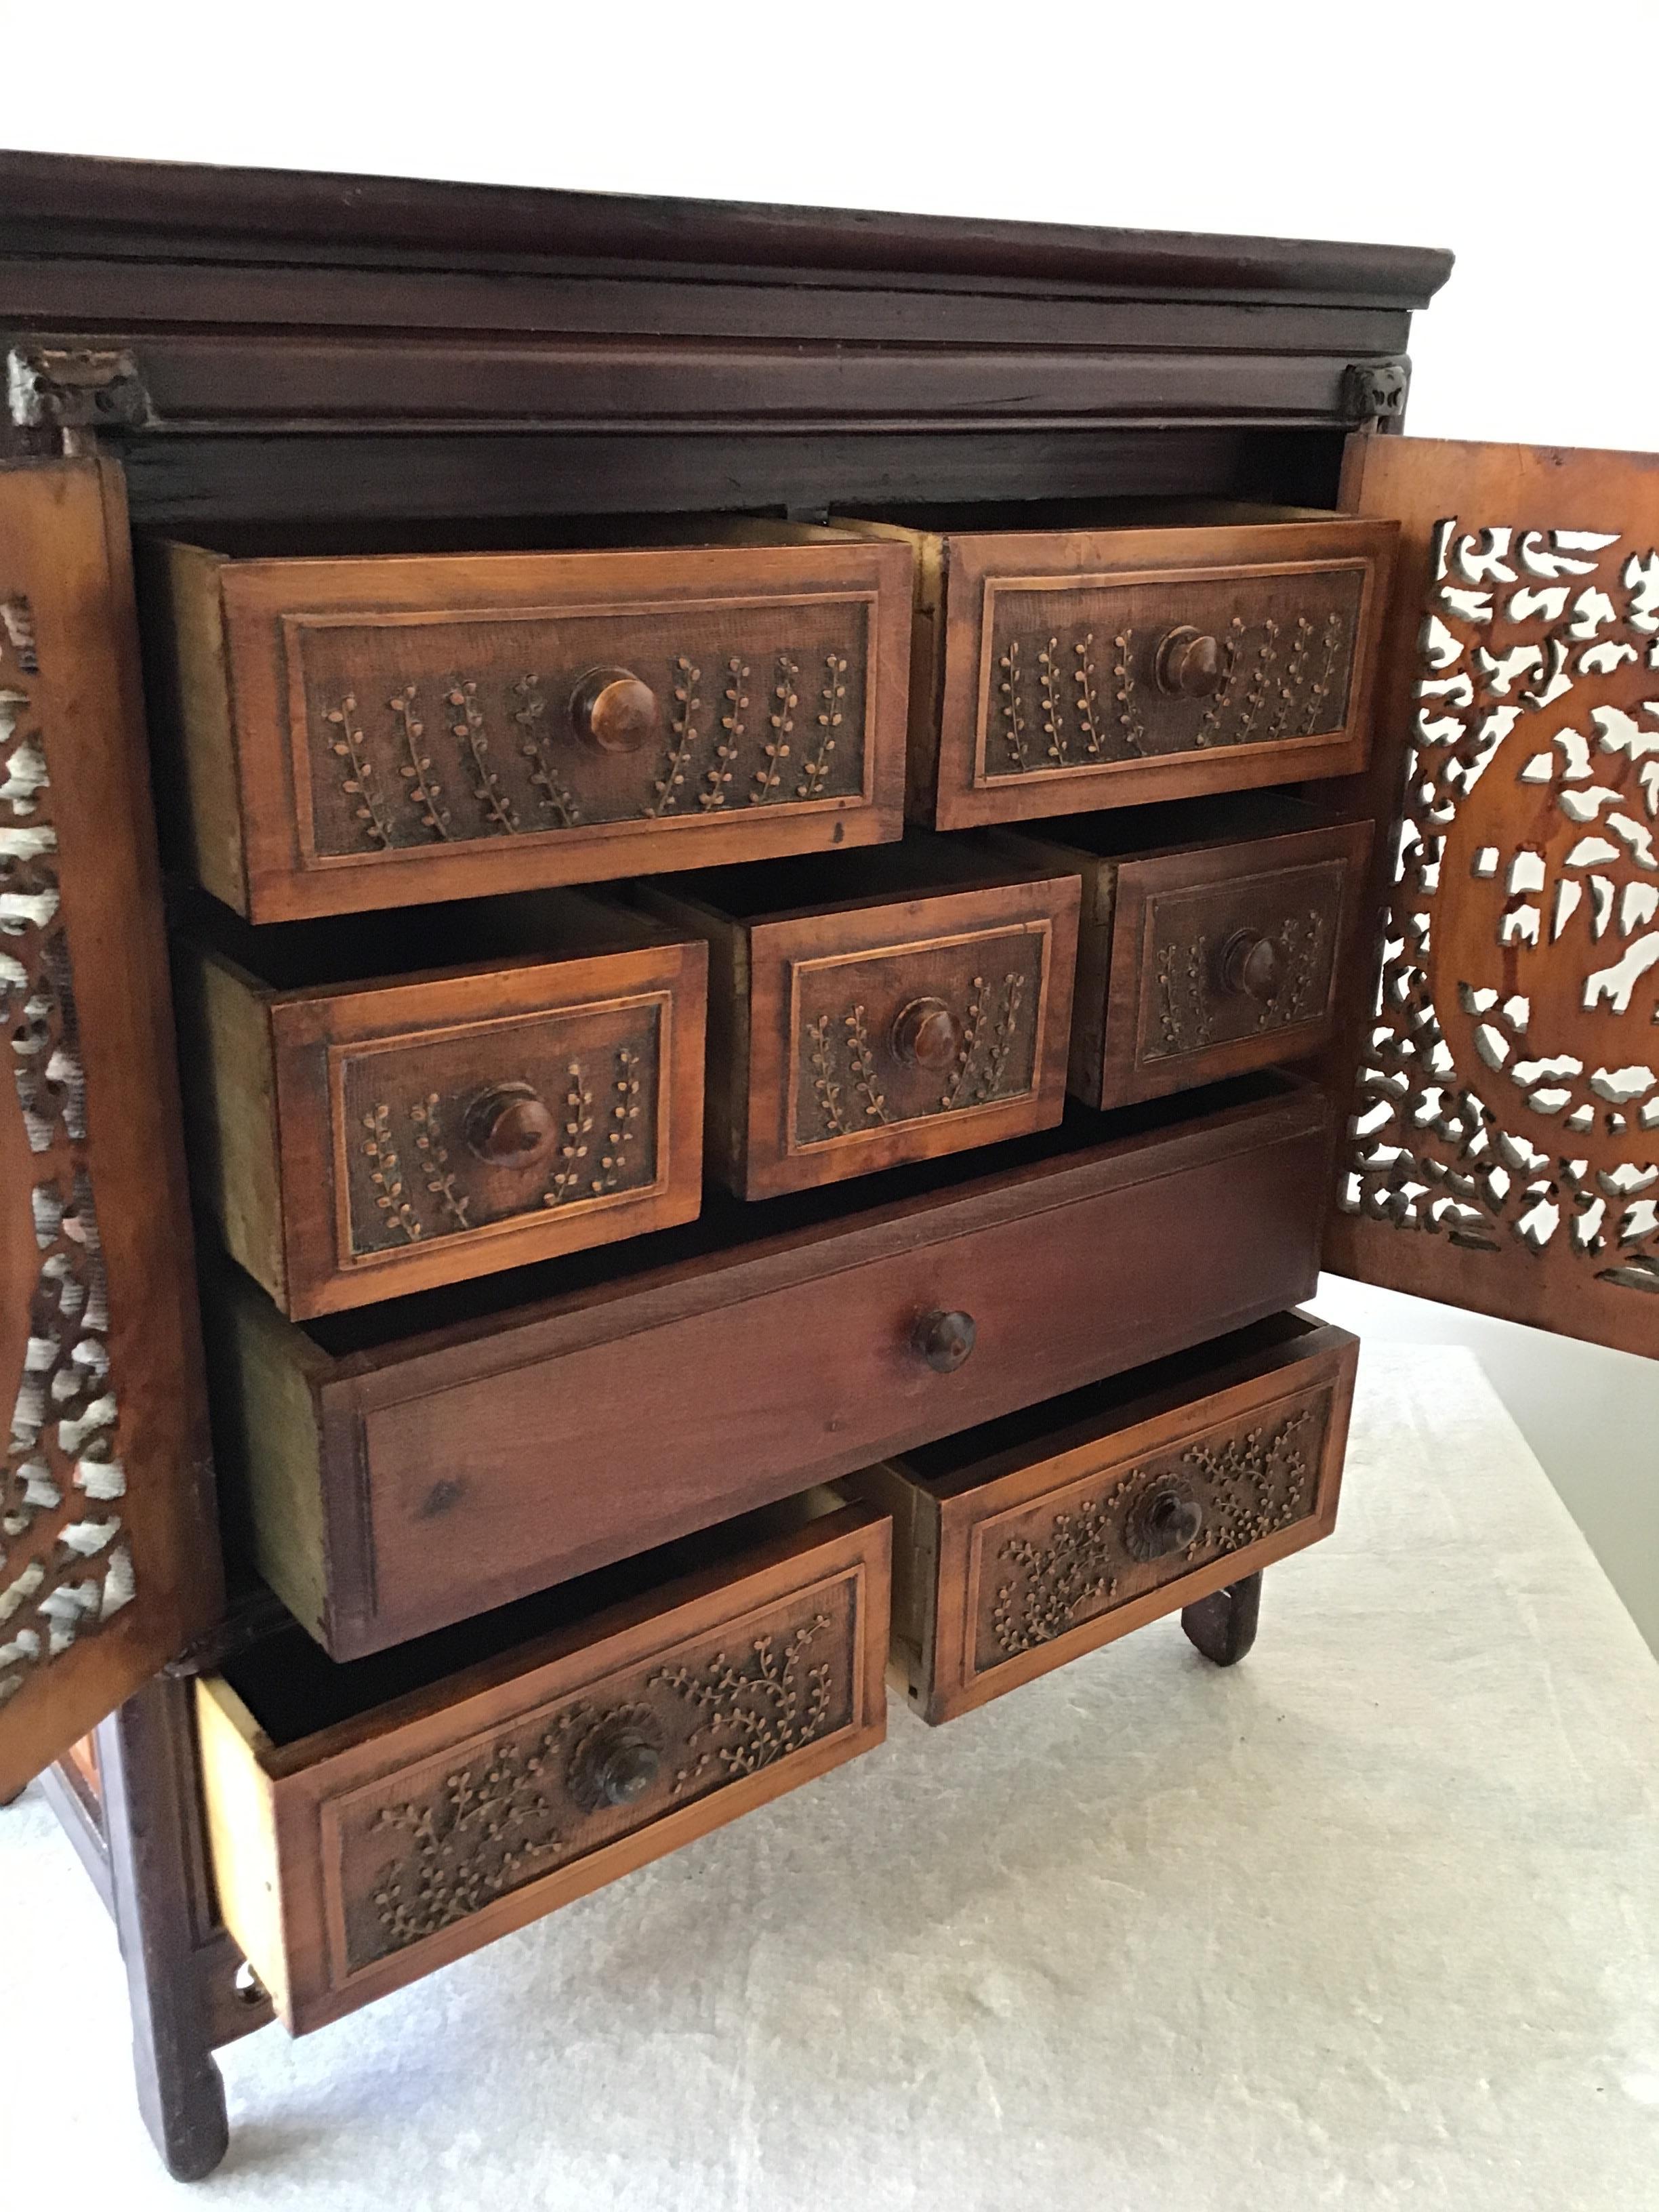 1880s Asian Carved Wood Box with Drawers For Sale 3